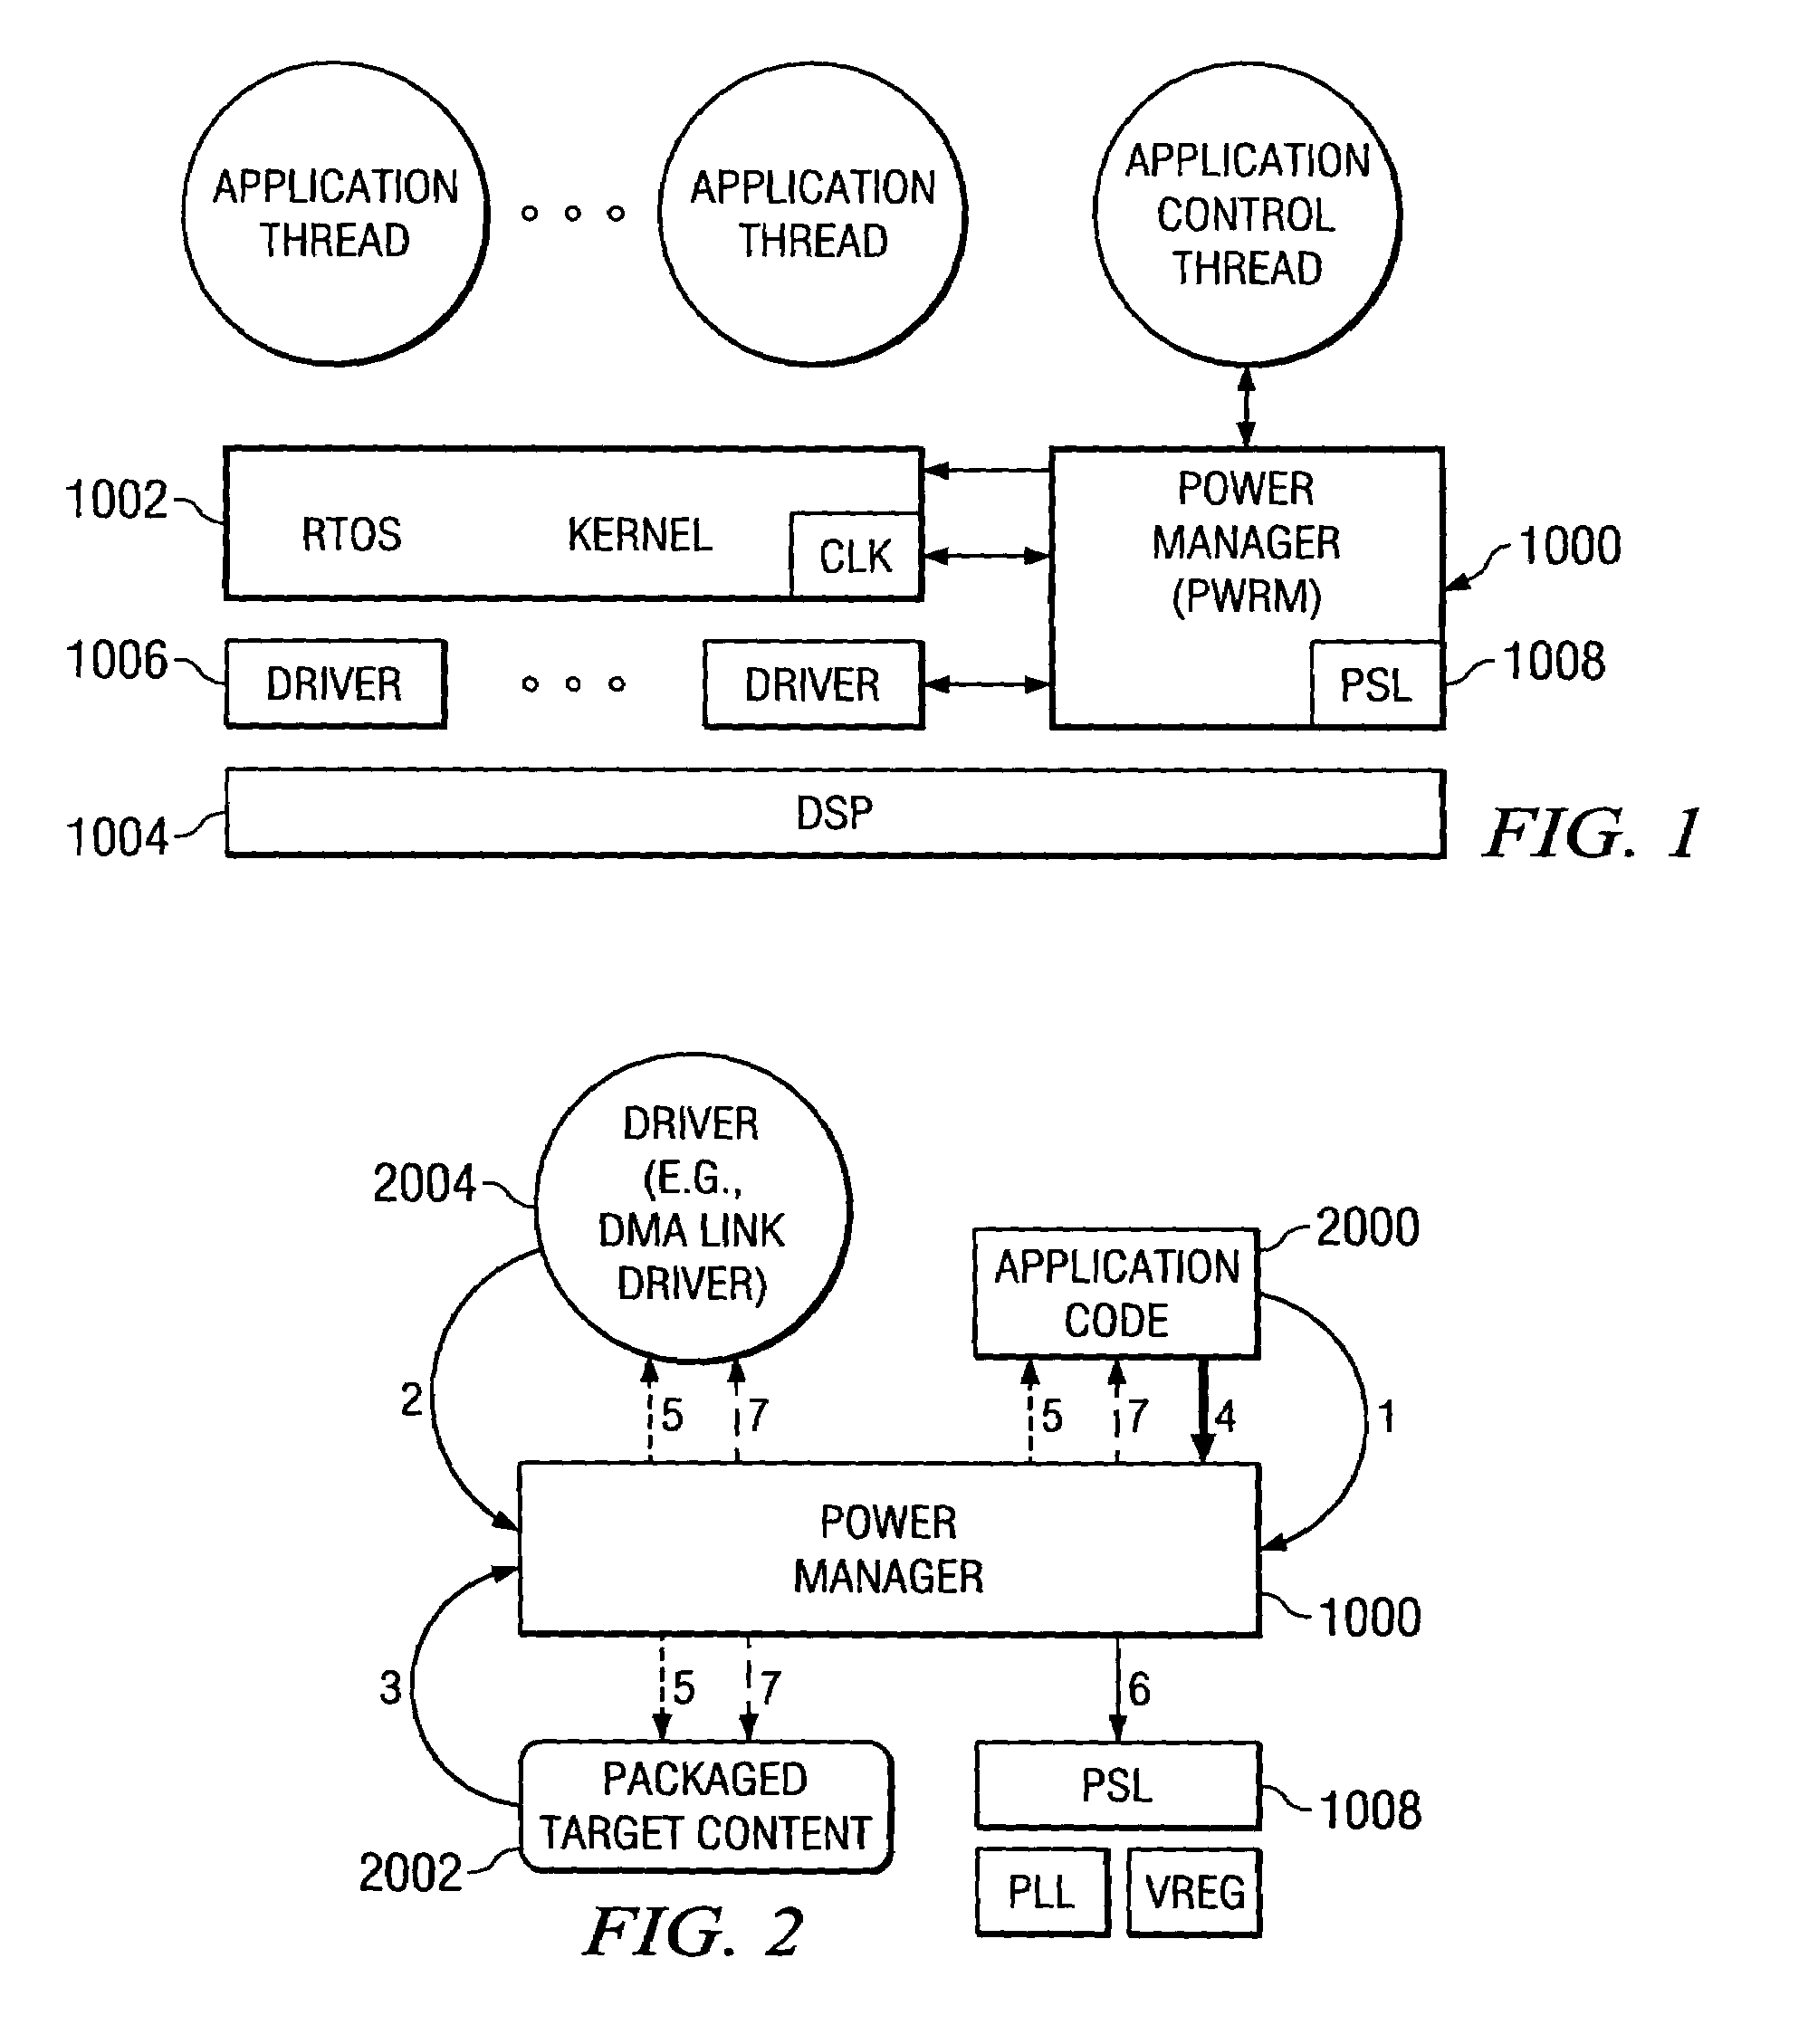 Methodology for managing power consumption in an application